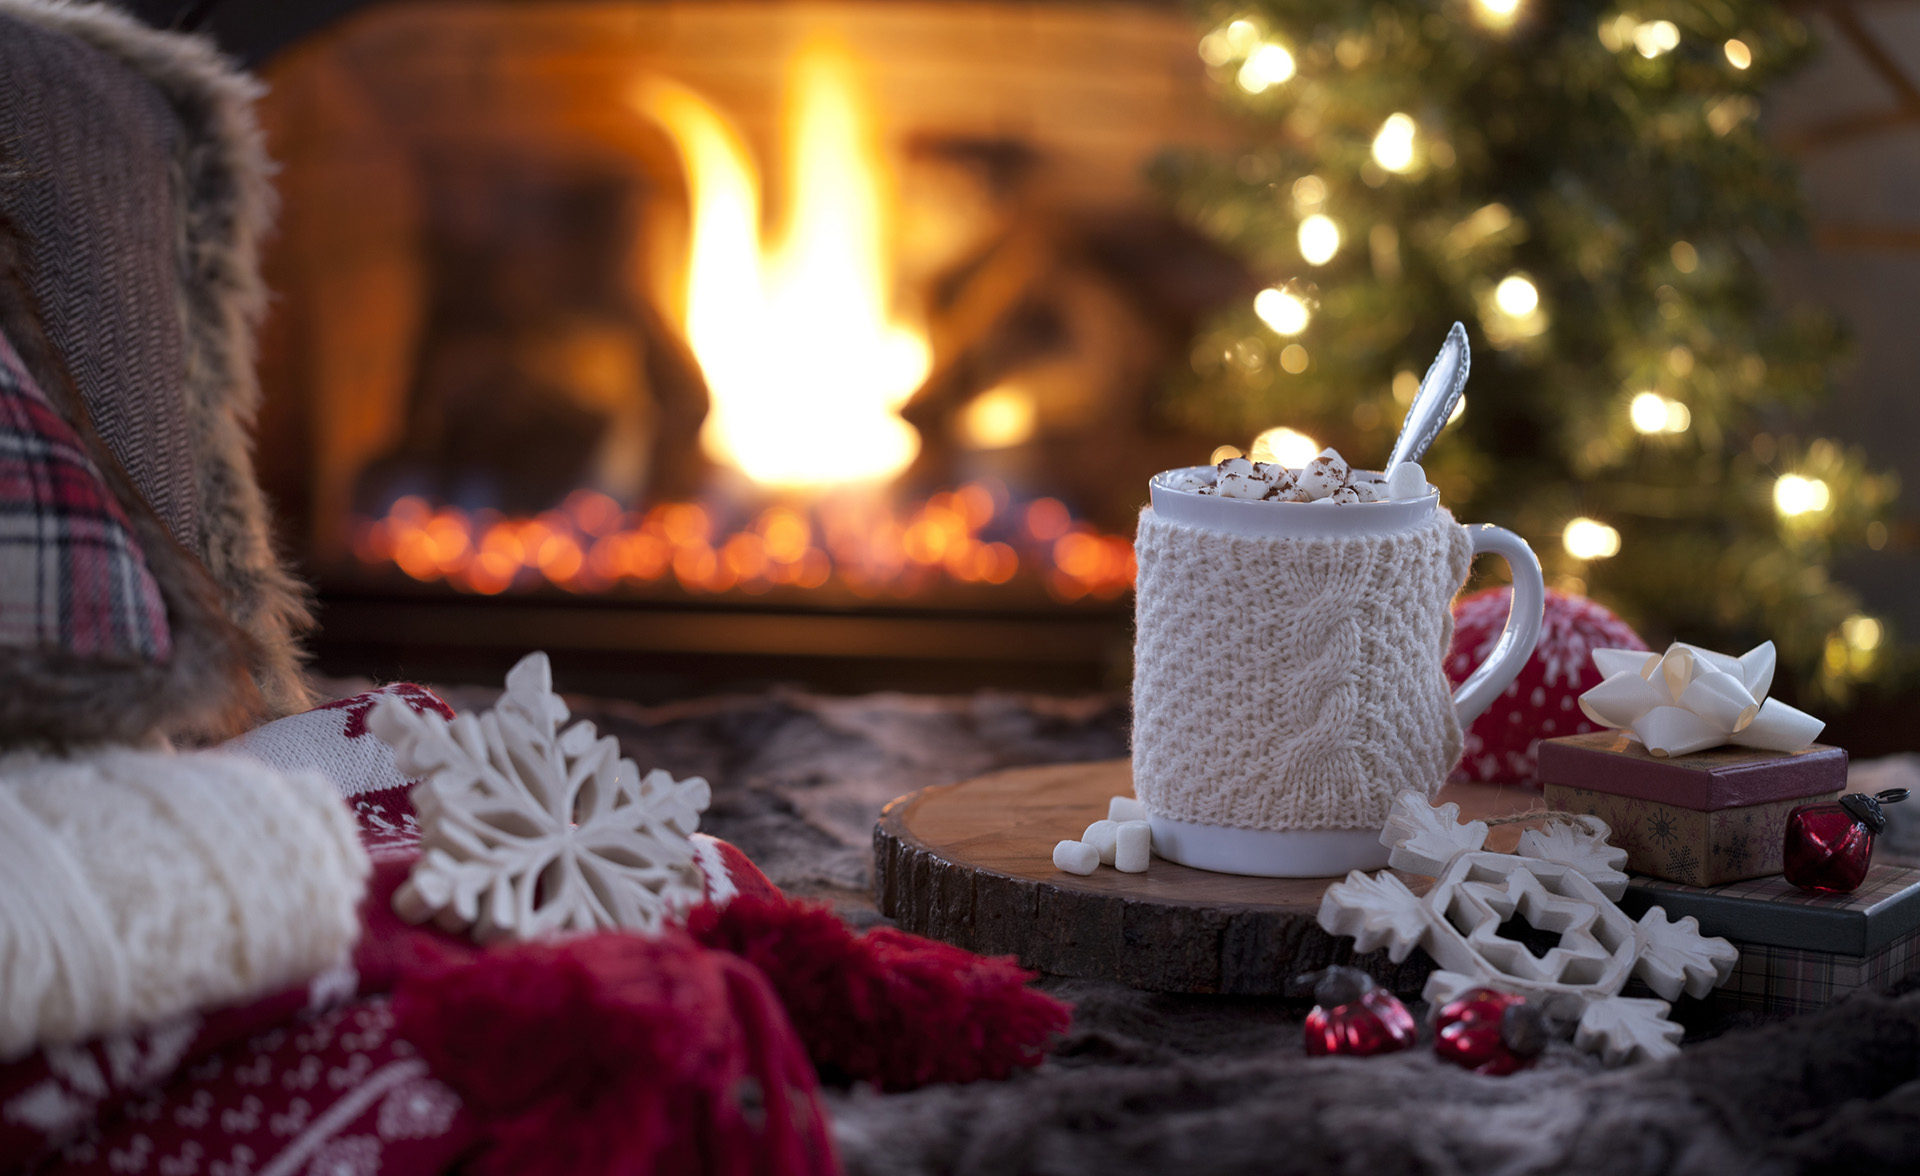 How to Create that 'Cosy Winter Feel' in your Home